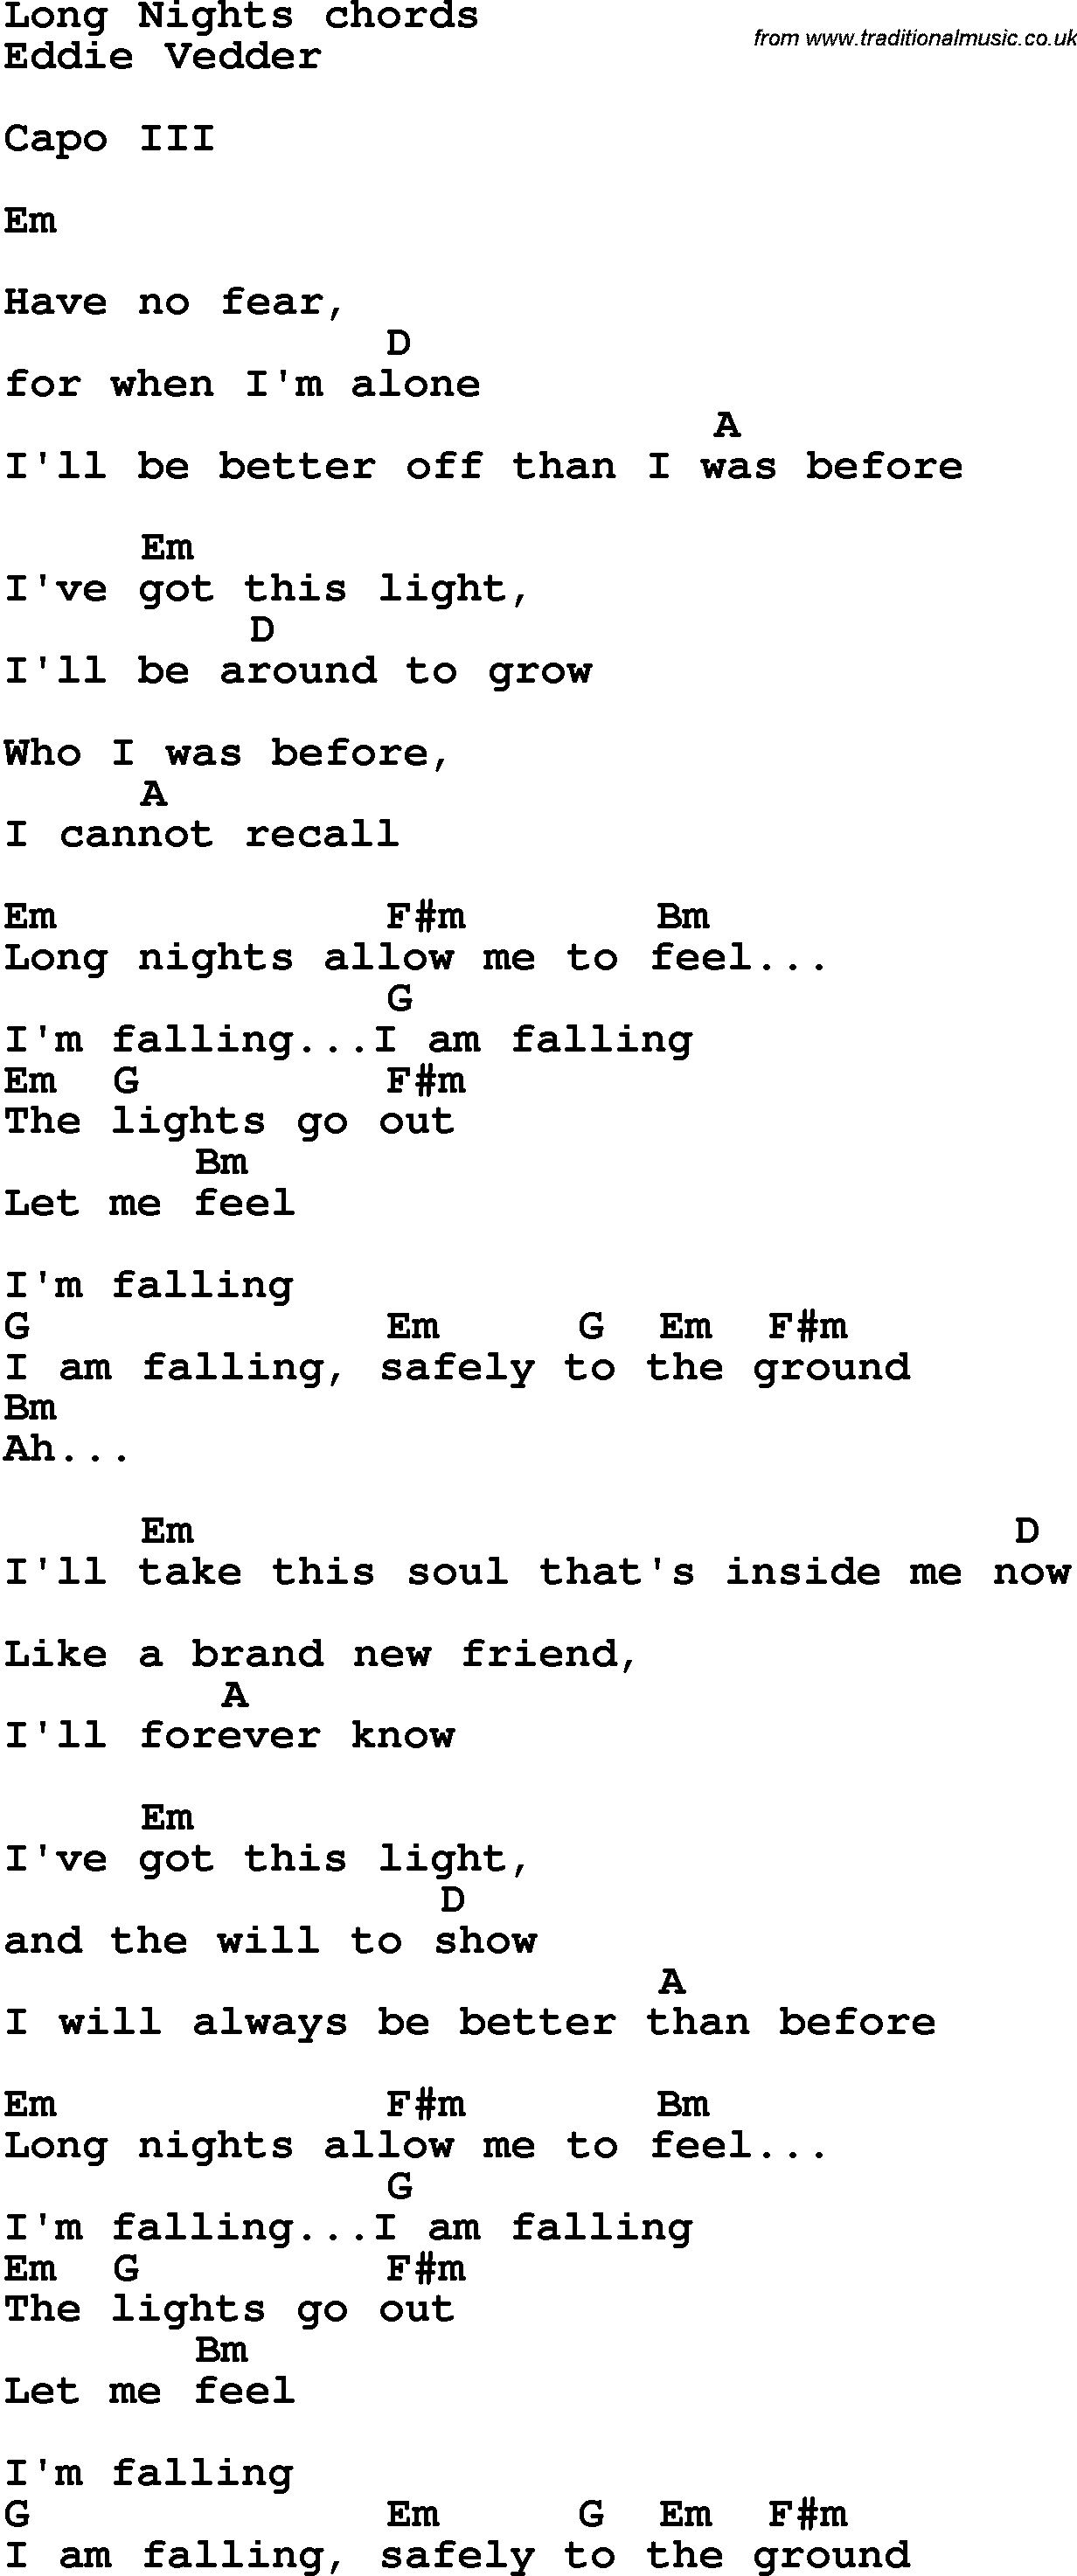 Song Lyrics with guitar chords for Long Nights